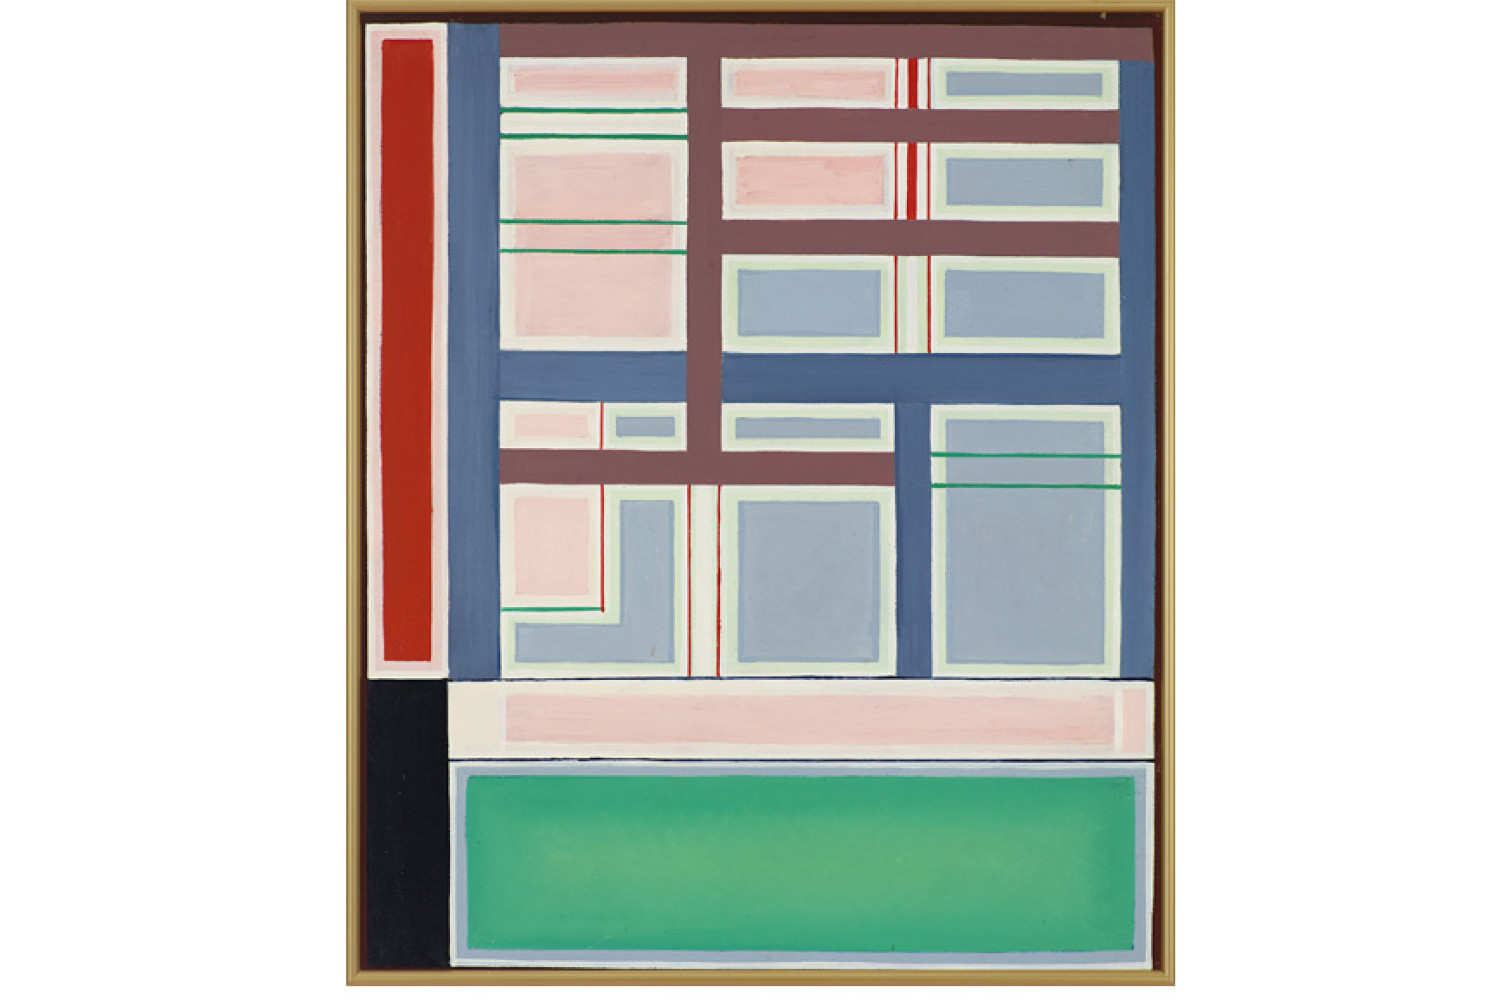 Étude No. 1 Analise, 1945-1965, by Pierre Daura (Spanish, 1896 - 1976); Oil on canvas; 30 1/2 x 25 1/2 inches. Courtesy of the Lowe Art Museum, University of Miami. © Lowe Art Museum, University of Miami.